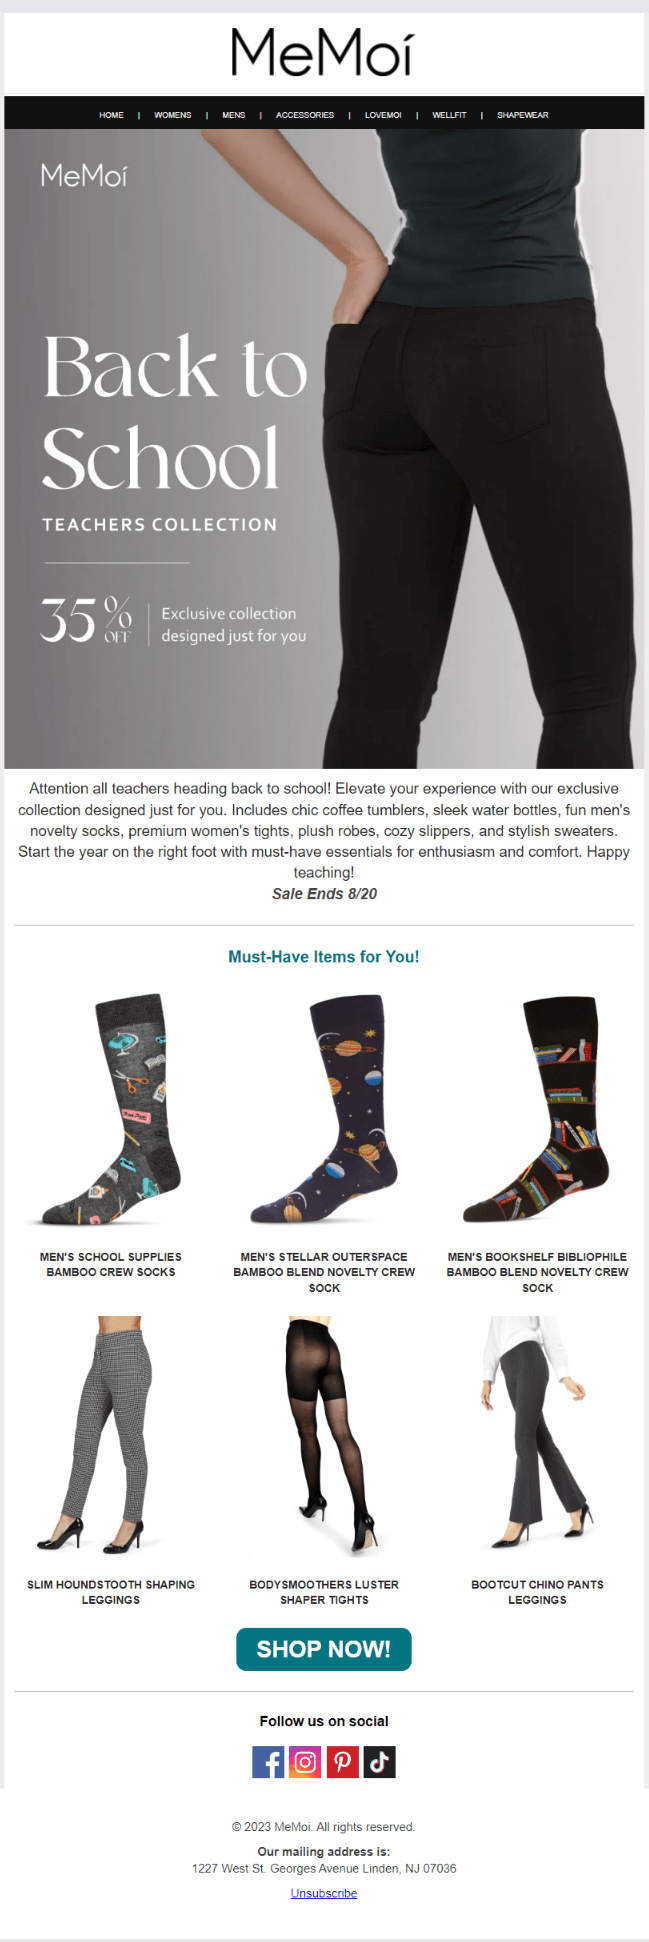 Email from MeMoi Fashion that promotes a teachers’ collection of clothes, fun socks, tights, and accessories like water bottles